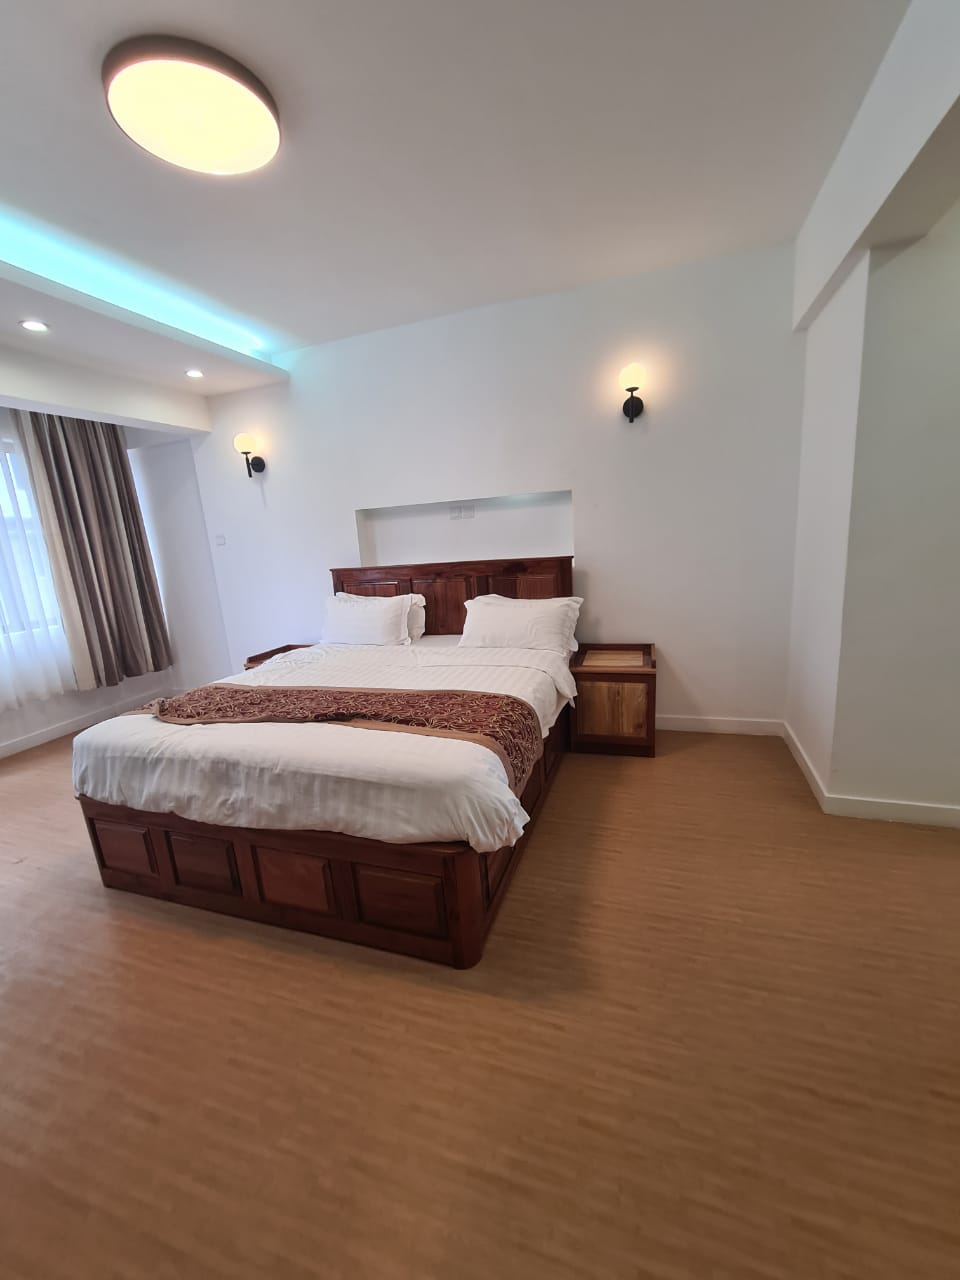 Hot Deal: Homely 4 Bedroom Apartment with DSQ for Sale in Lavington at Ksh16.5M7